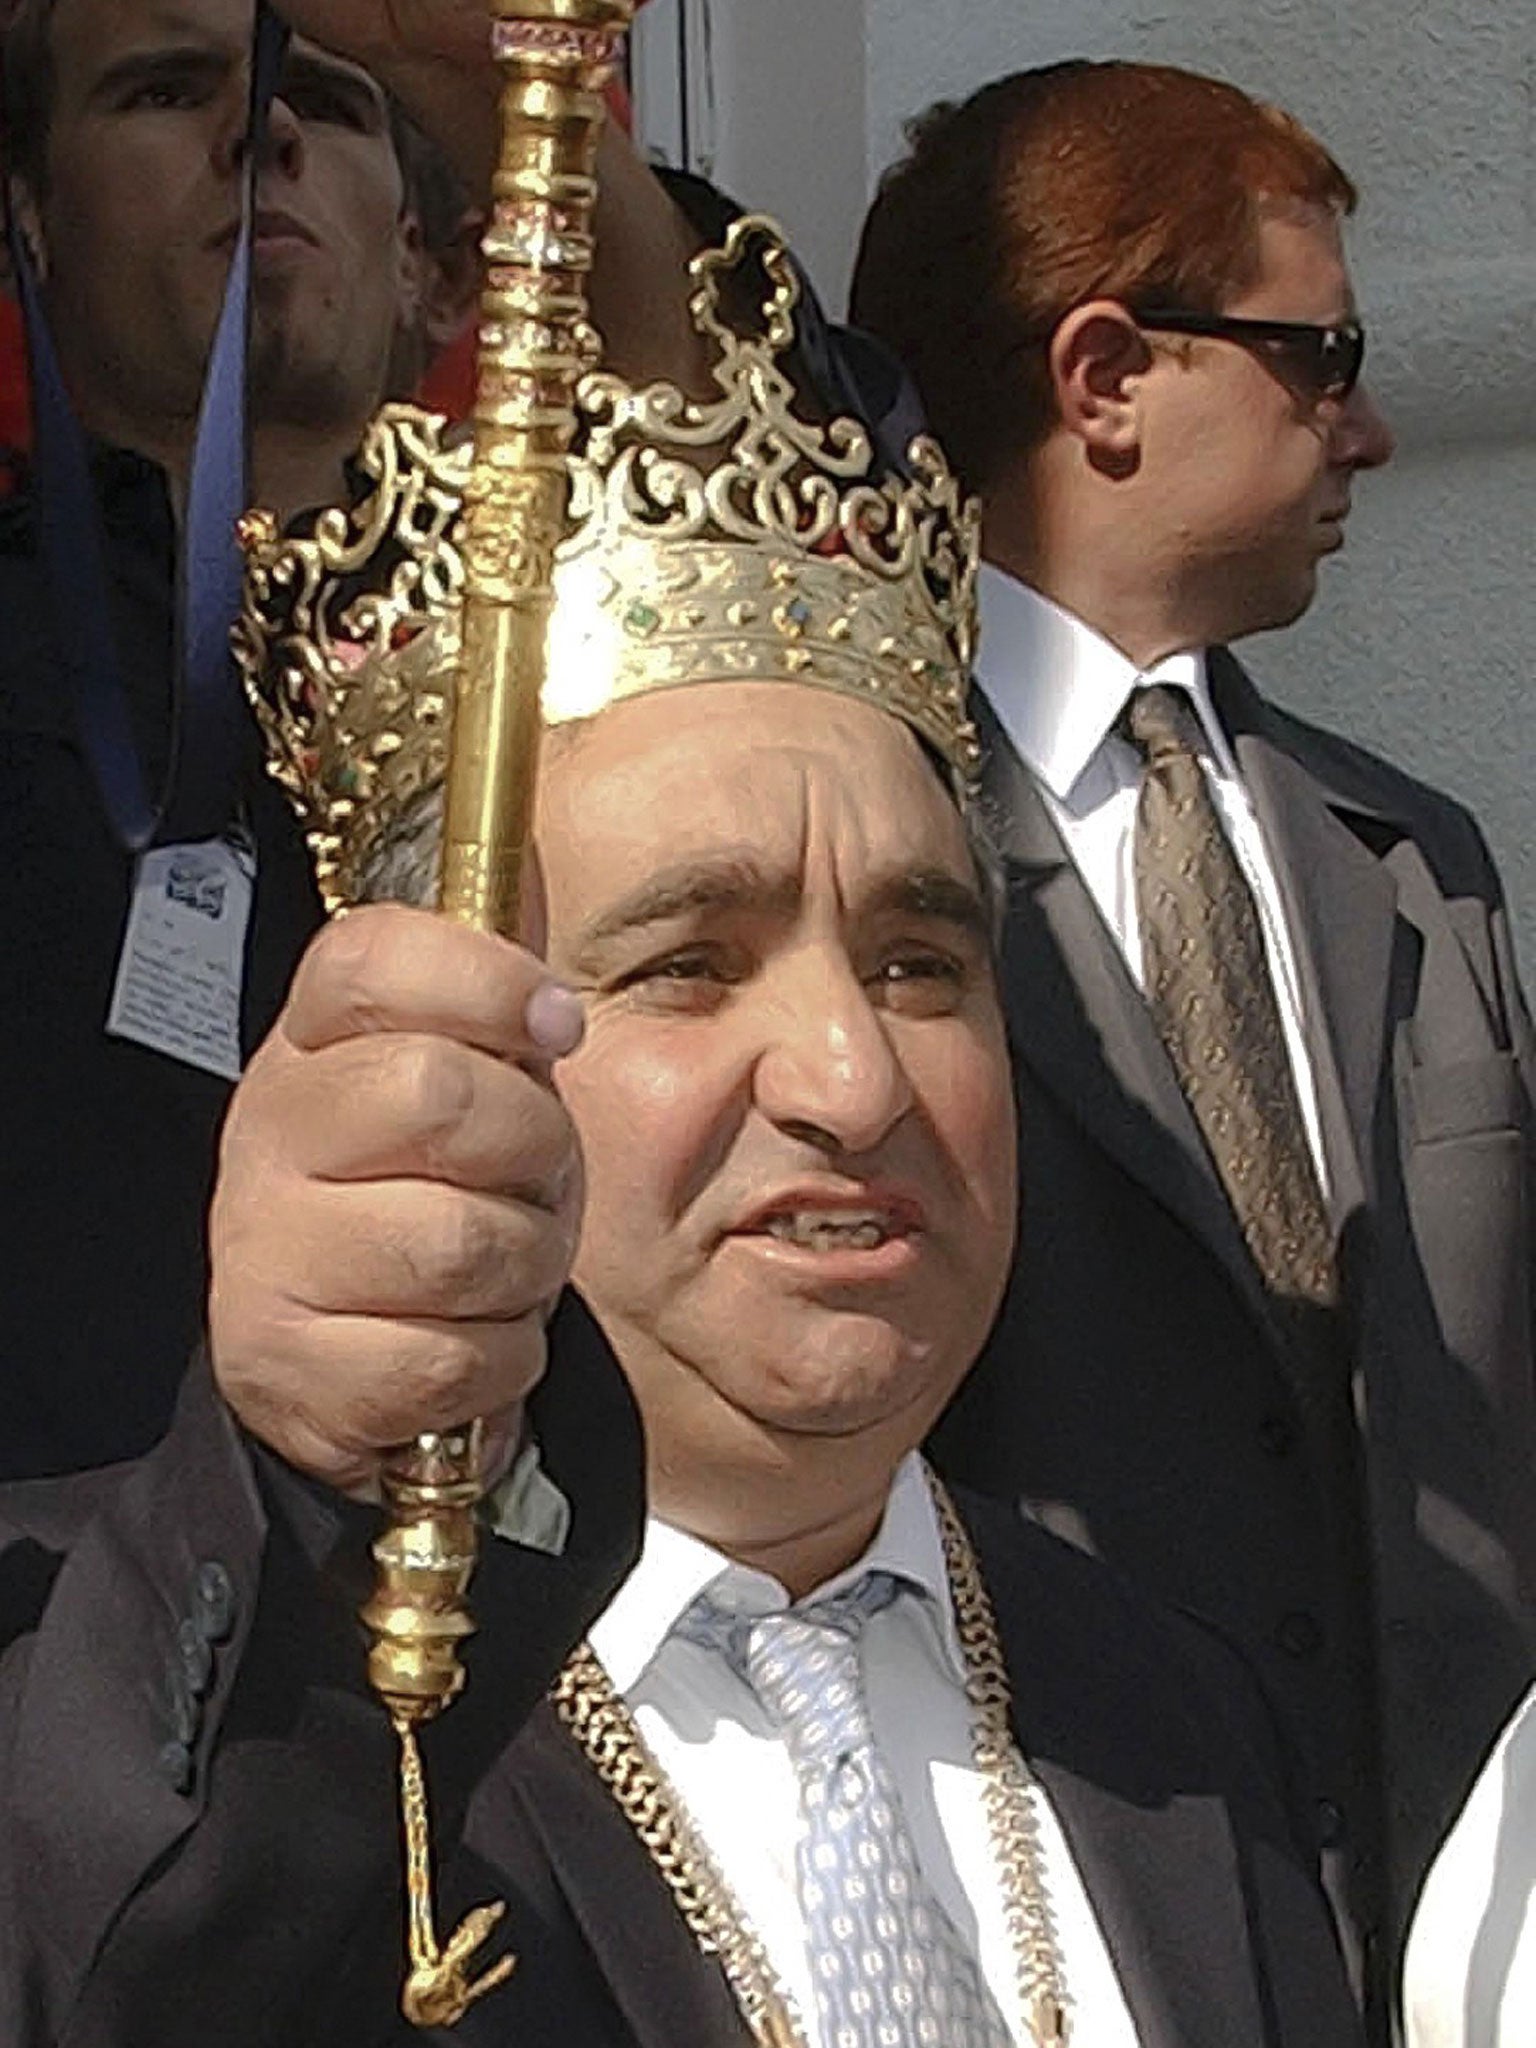 Florin Cioaba proclaimed himself 'King of the Gypsies' shortly after his father's death